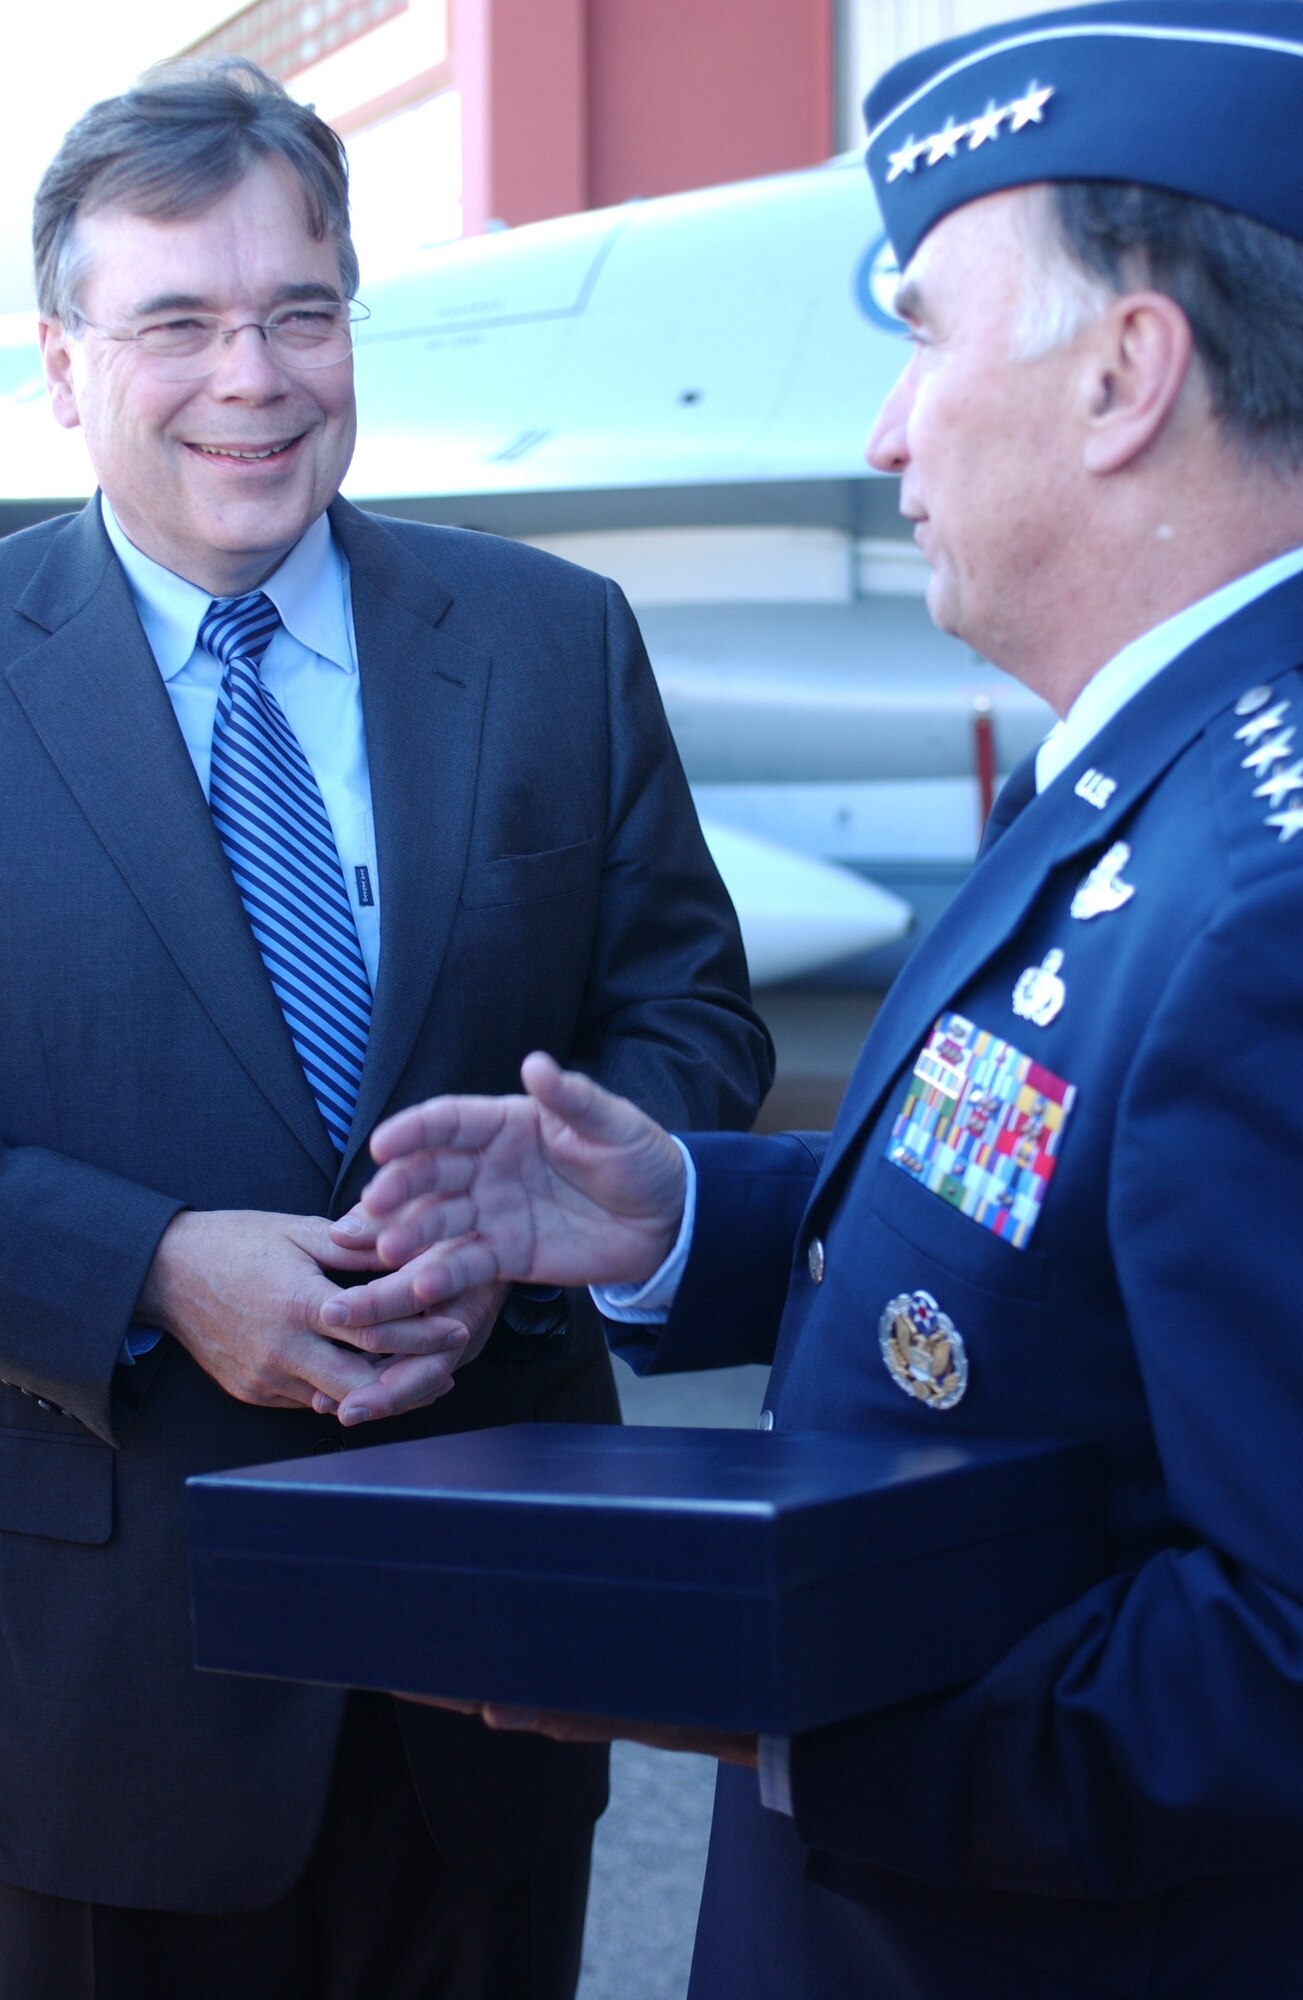 USAFE Commander Gen. Tom Hobbins meets with Iceland Prime Minister Geir H. Haarde during the opening ceremonies of exercise Northern Viking 2007,  The exercise is designed to demonstrate U.S. commitment to the 1951 bilateral U.S./Iceland defense agreement and reinvigorate air defense command and control capabilities of joint/coalition forces in Iceland.